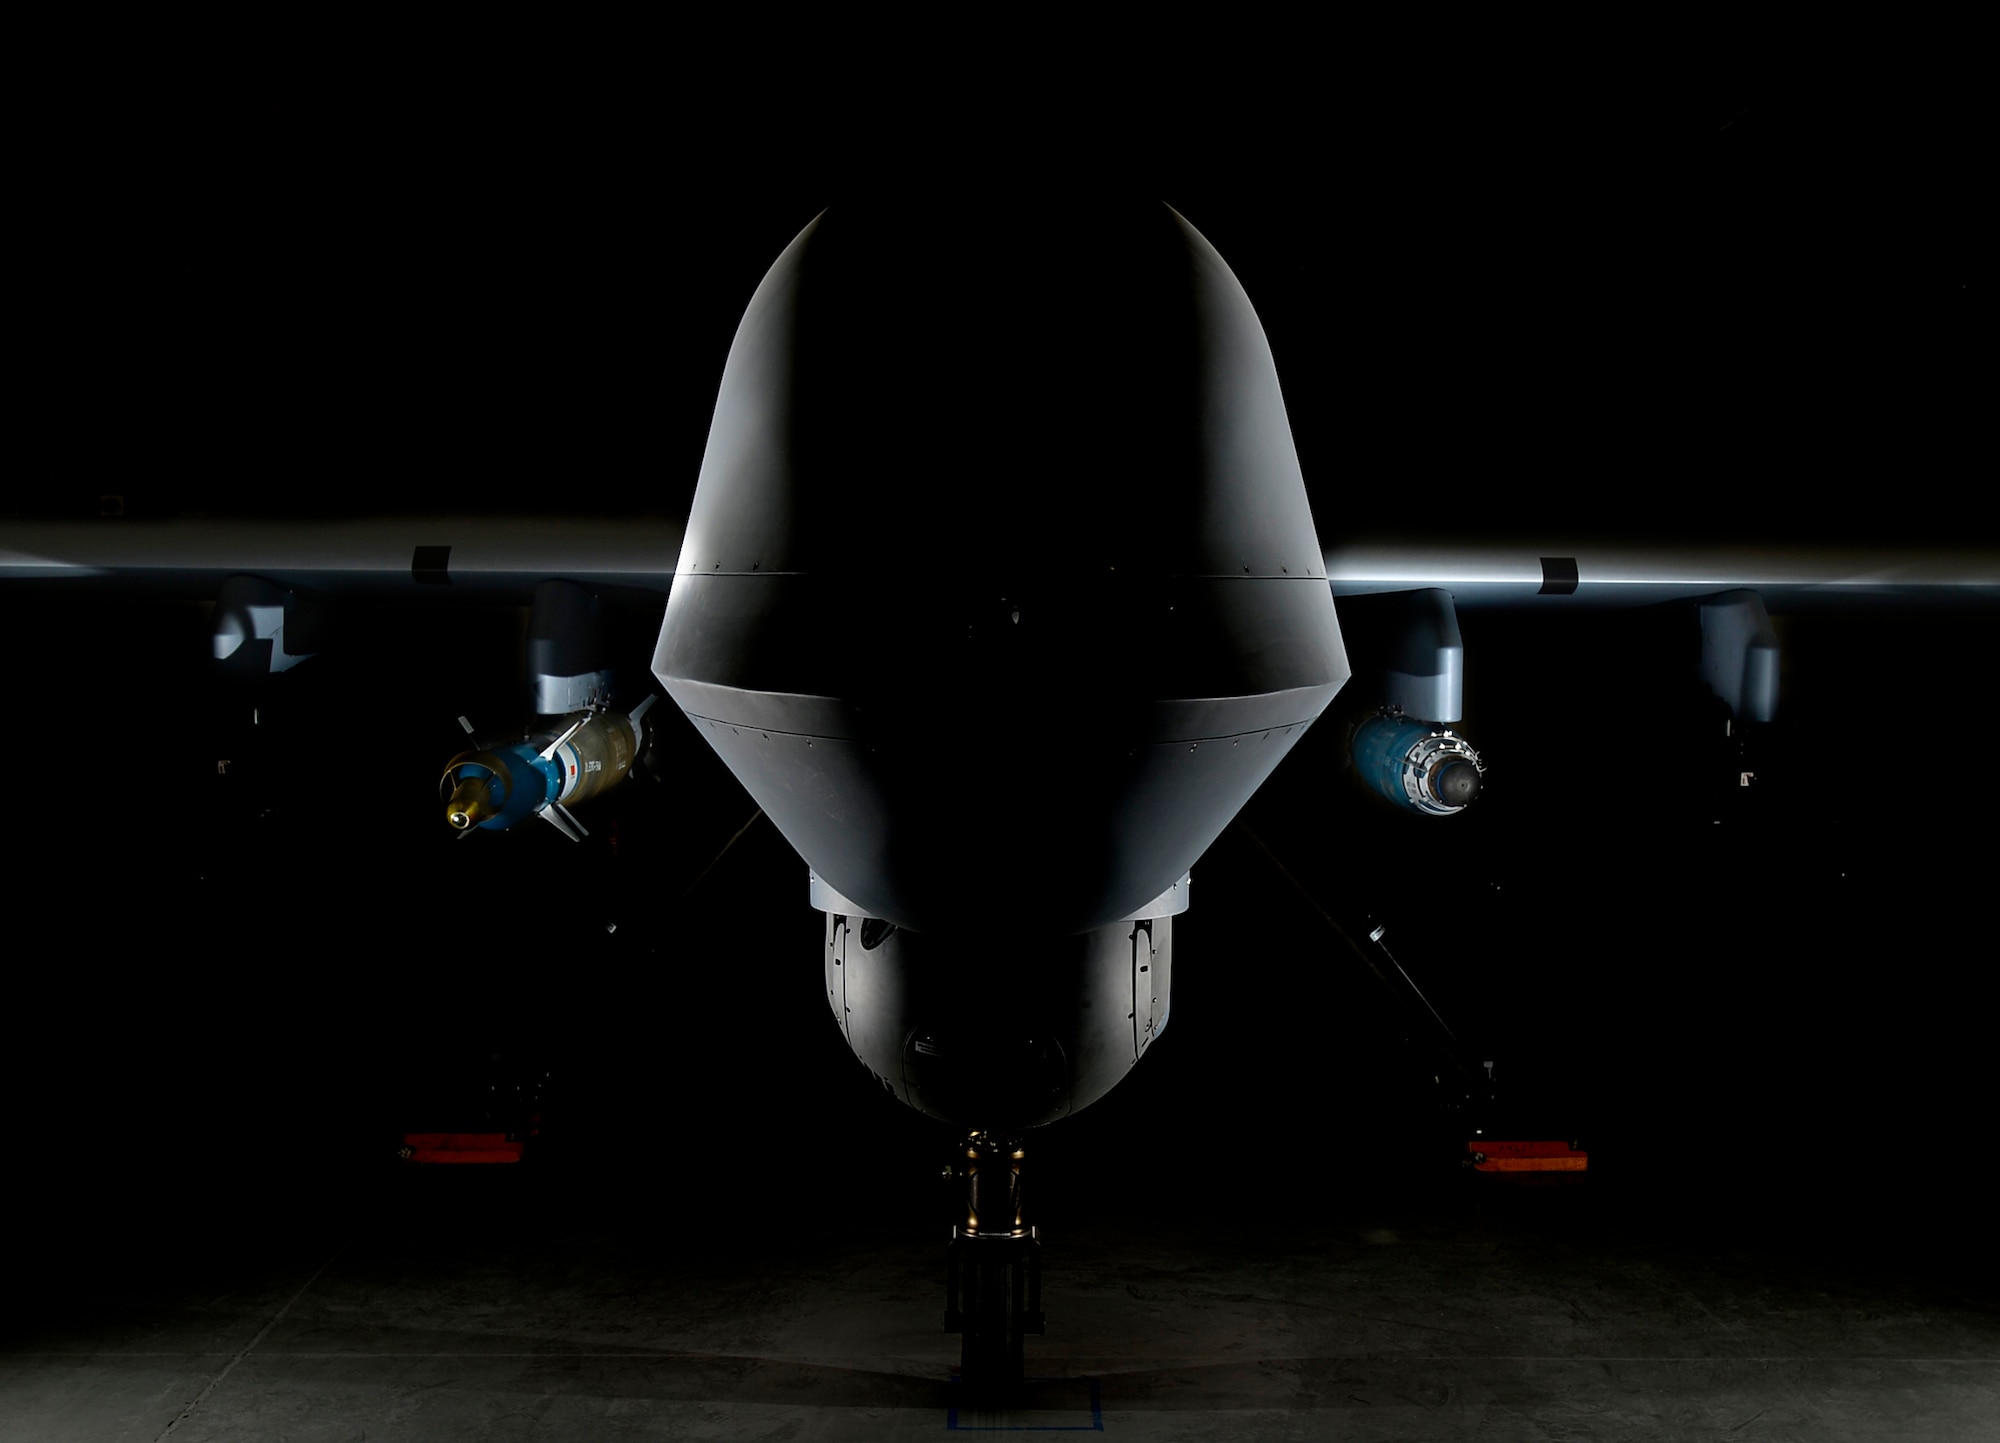 An MQ-9 Reaper is loaded with a GBU-12 laser-guided bomb on the left and a GBU-38 Joint Direct Attack Munition on the right April 13, 2017, at Creech Air Force Base, Nev. The JDAM is a GPS guided munition which brings added capability to the warfighters, specifically by aircrews being able to employ weapons through inclement weather. The first two GBU-38s employed in training successfully hit their targets May 1, 2017, over the Nevada Test and Training Range. (U.S. Air Force photo by Senior Airman Christian Clausen)